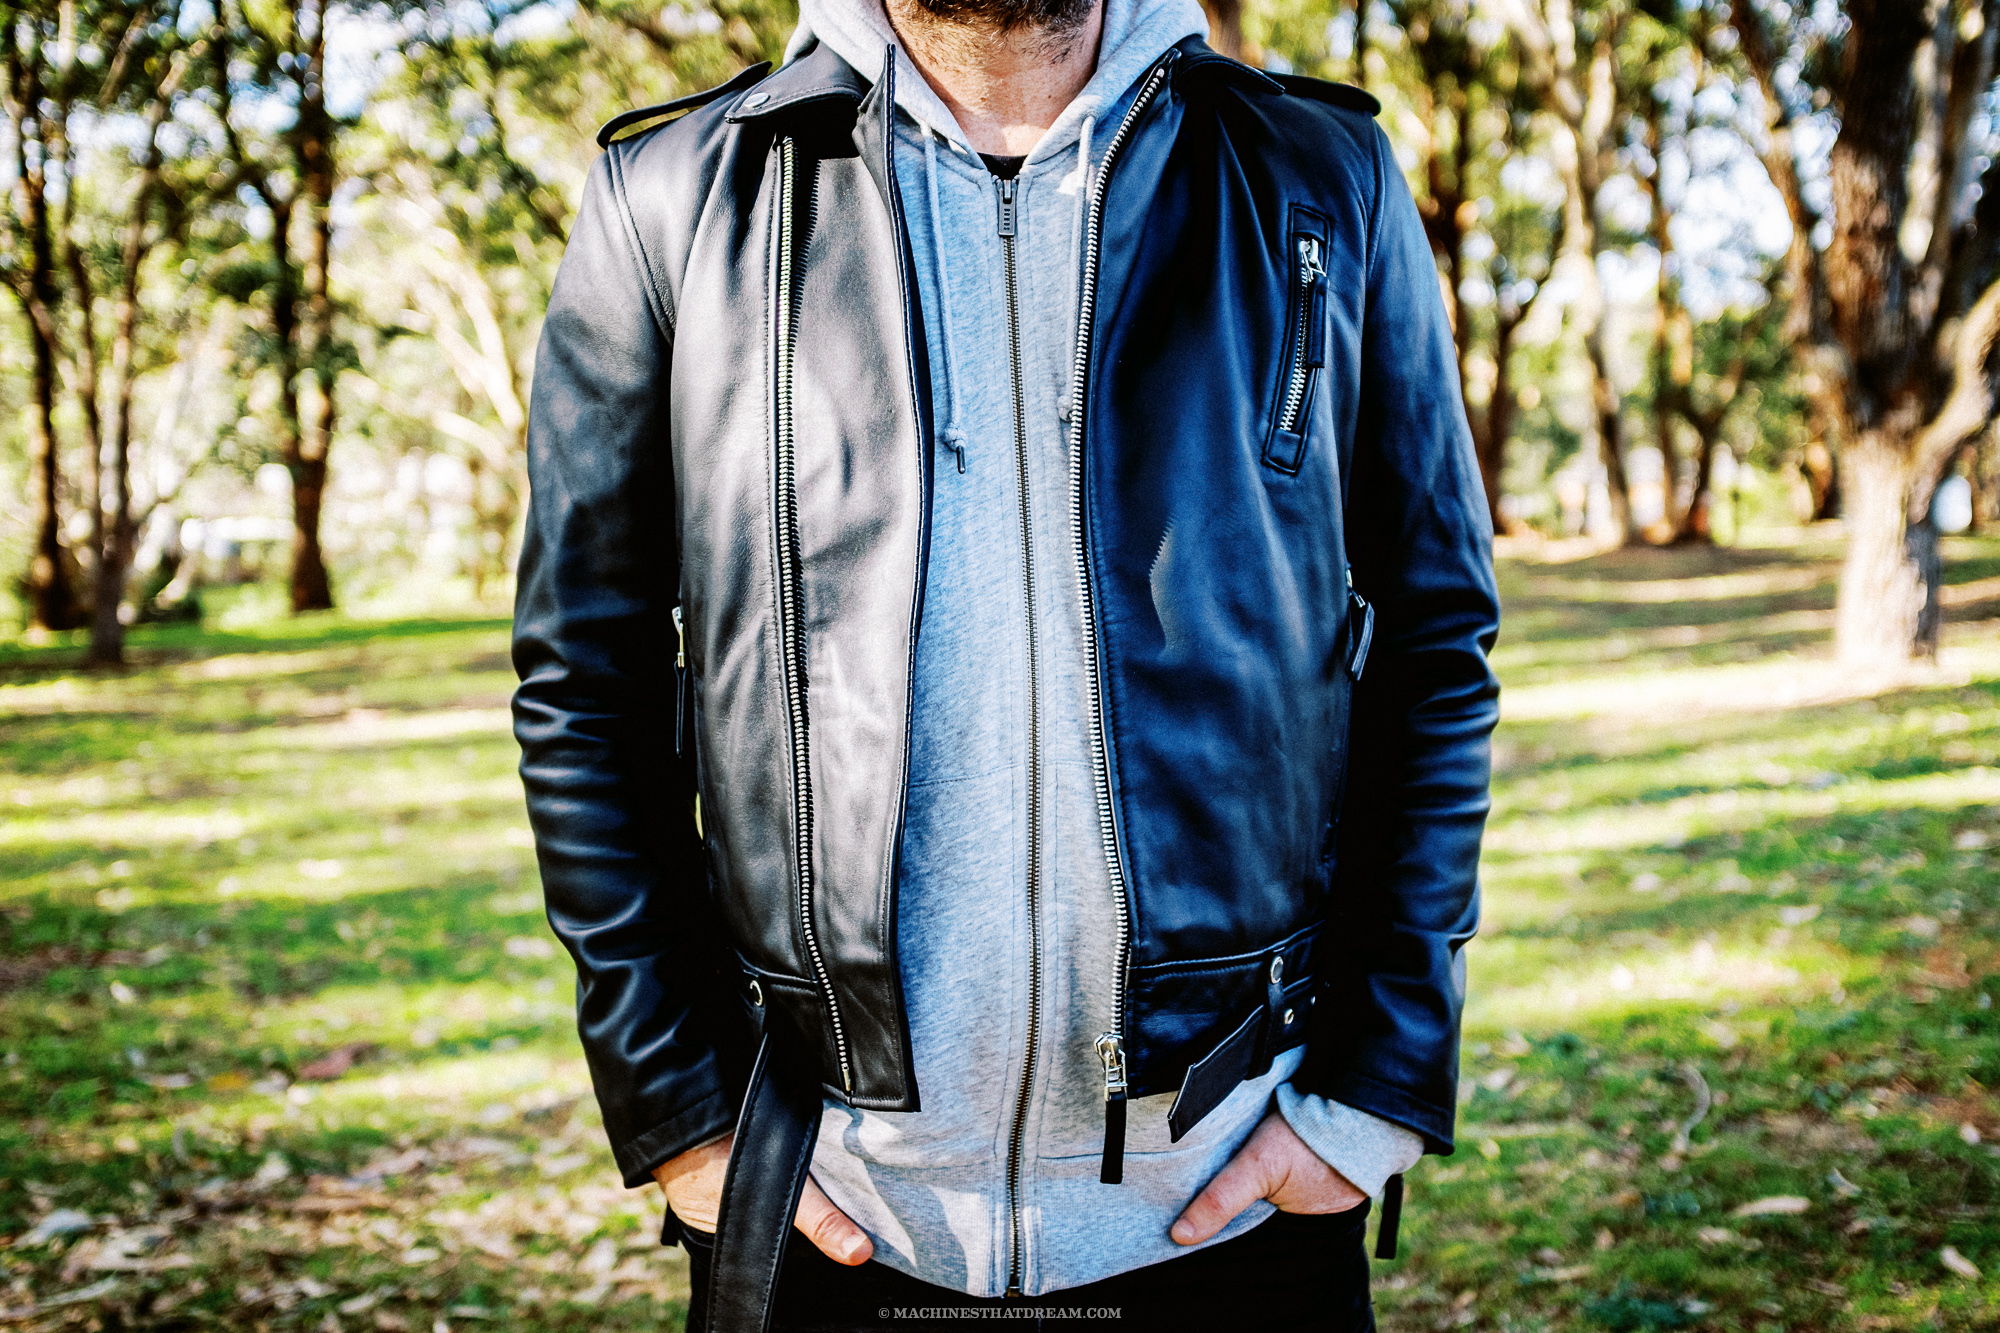 A strange man in a park wearing the Boda Skin's 'Voyager' leather motorcycle jacket